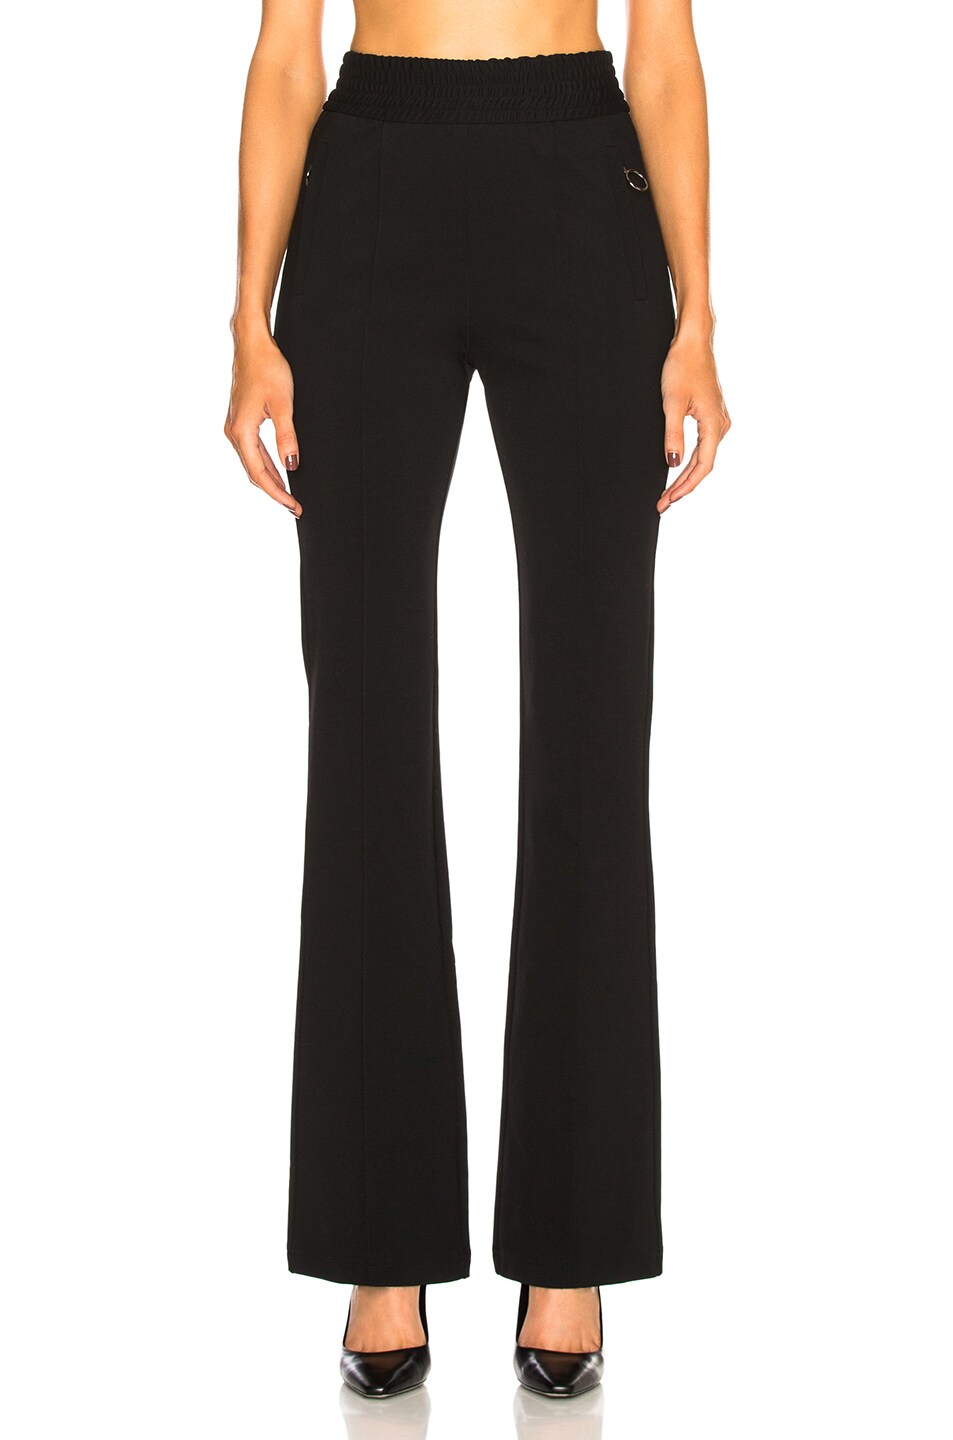 OFF-WHITE Silhouette Track Pant in Black | FWRD